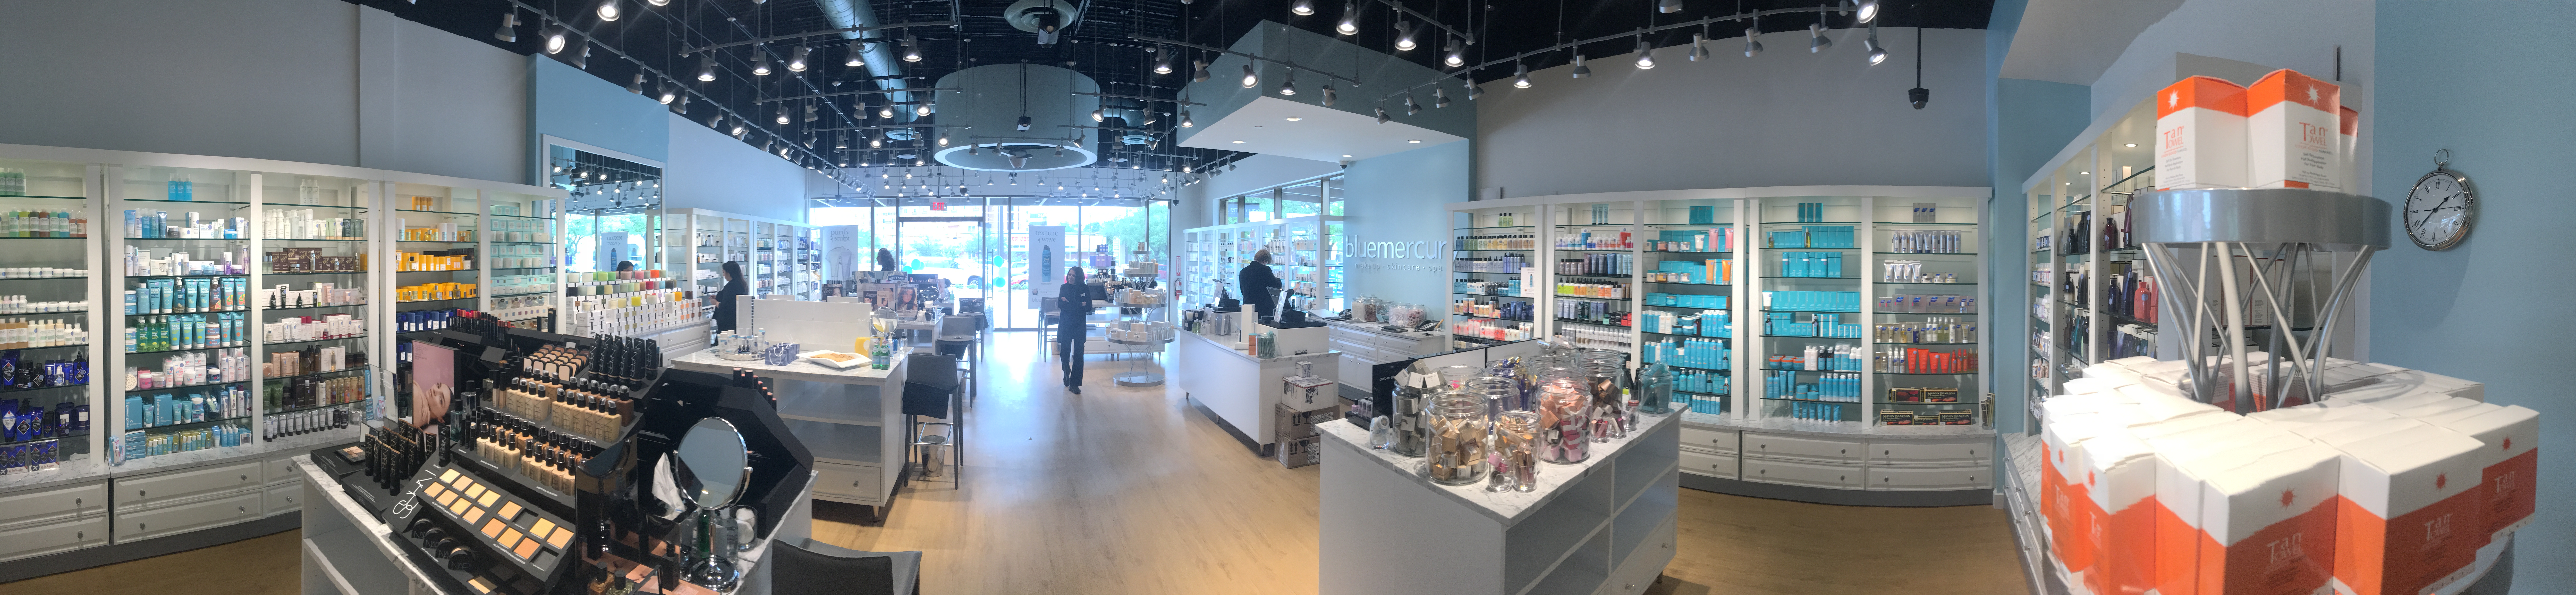 panoramic of inside a beauty store